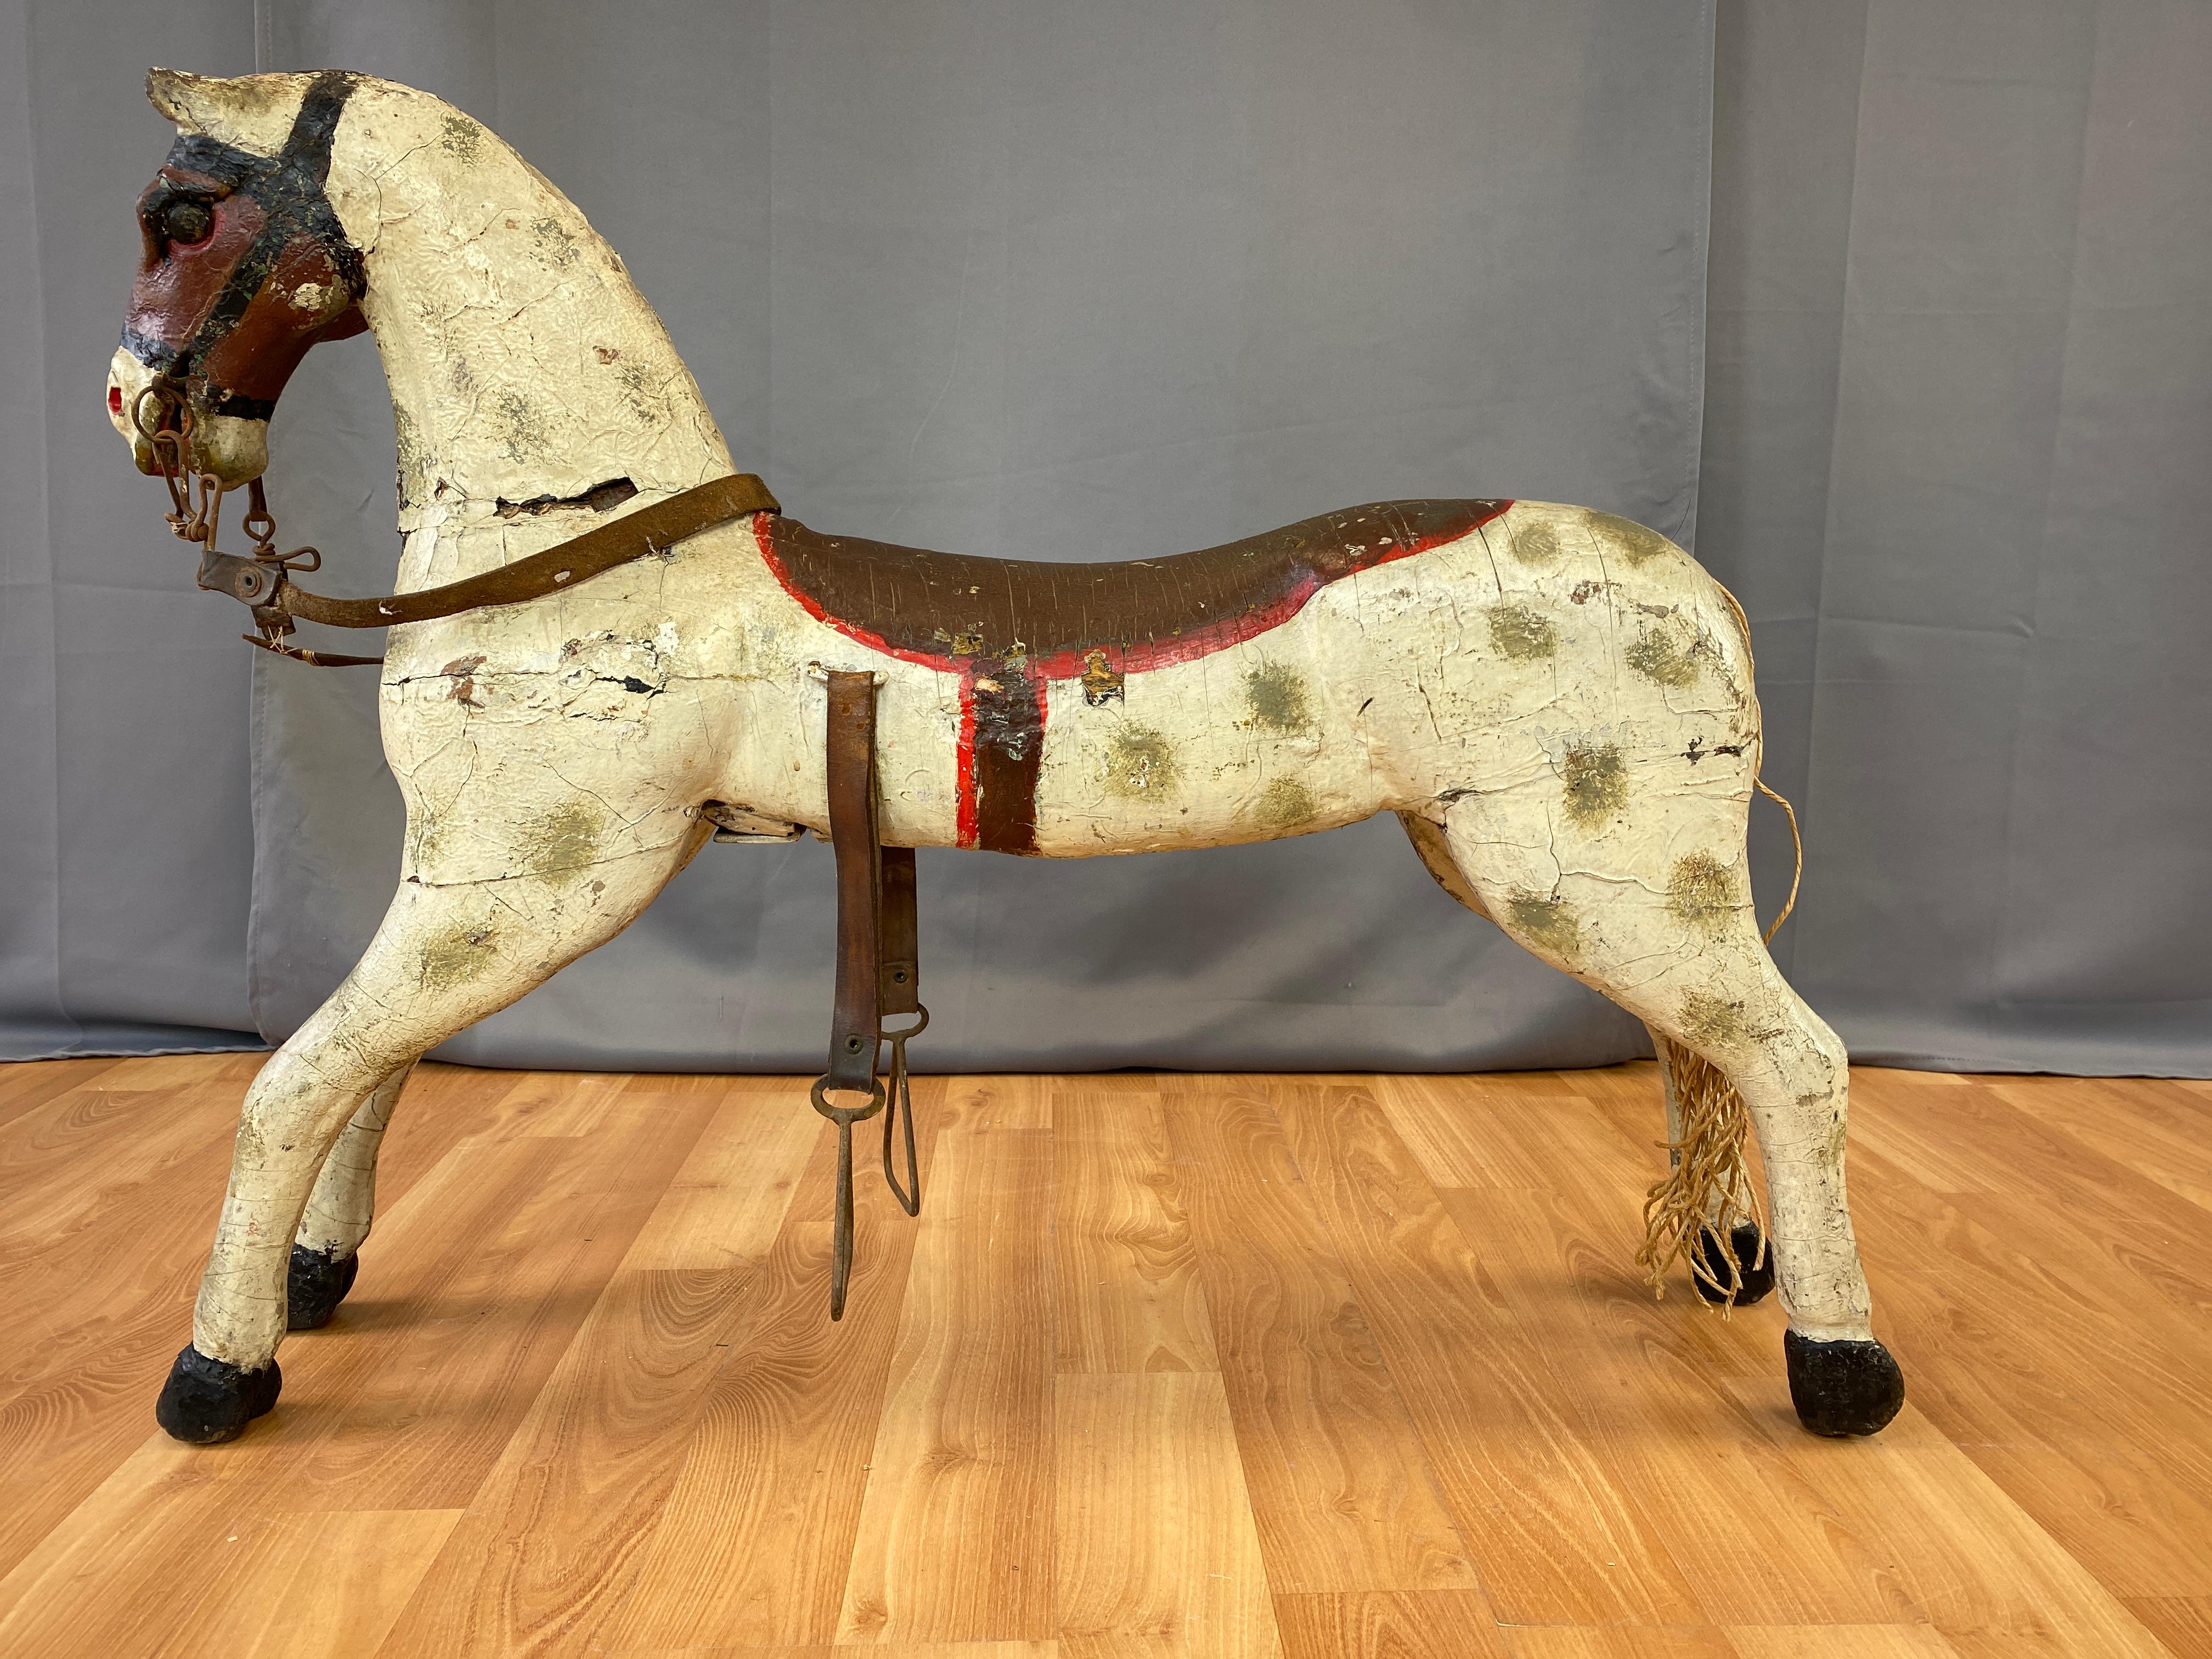 A wonderful whimsical circa 1860s painted wood carousel horse.
Was well made, carved solid wood construction, a testament to whom ever created this horse that it still looks great after all those years going around and around. 
Nice details from